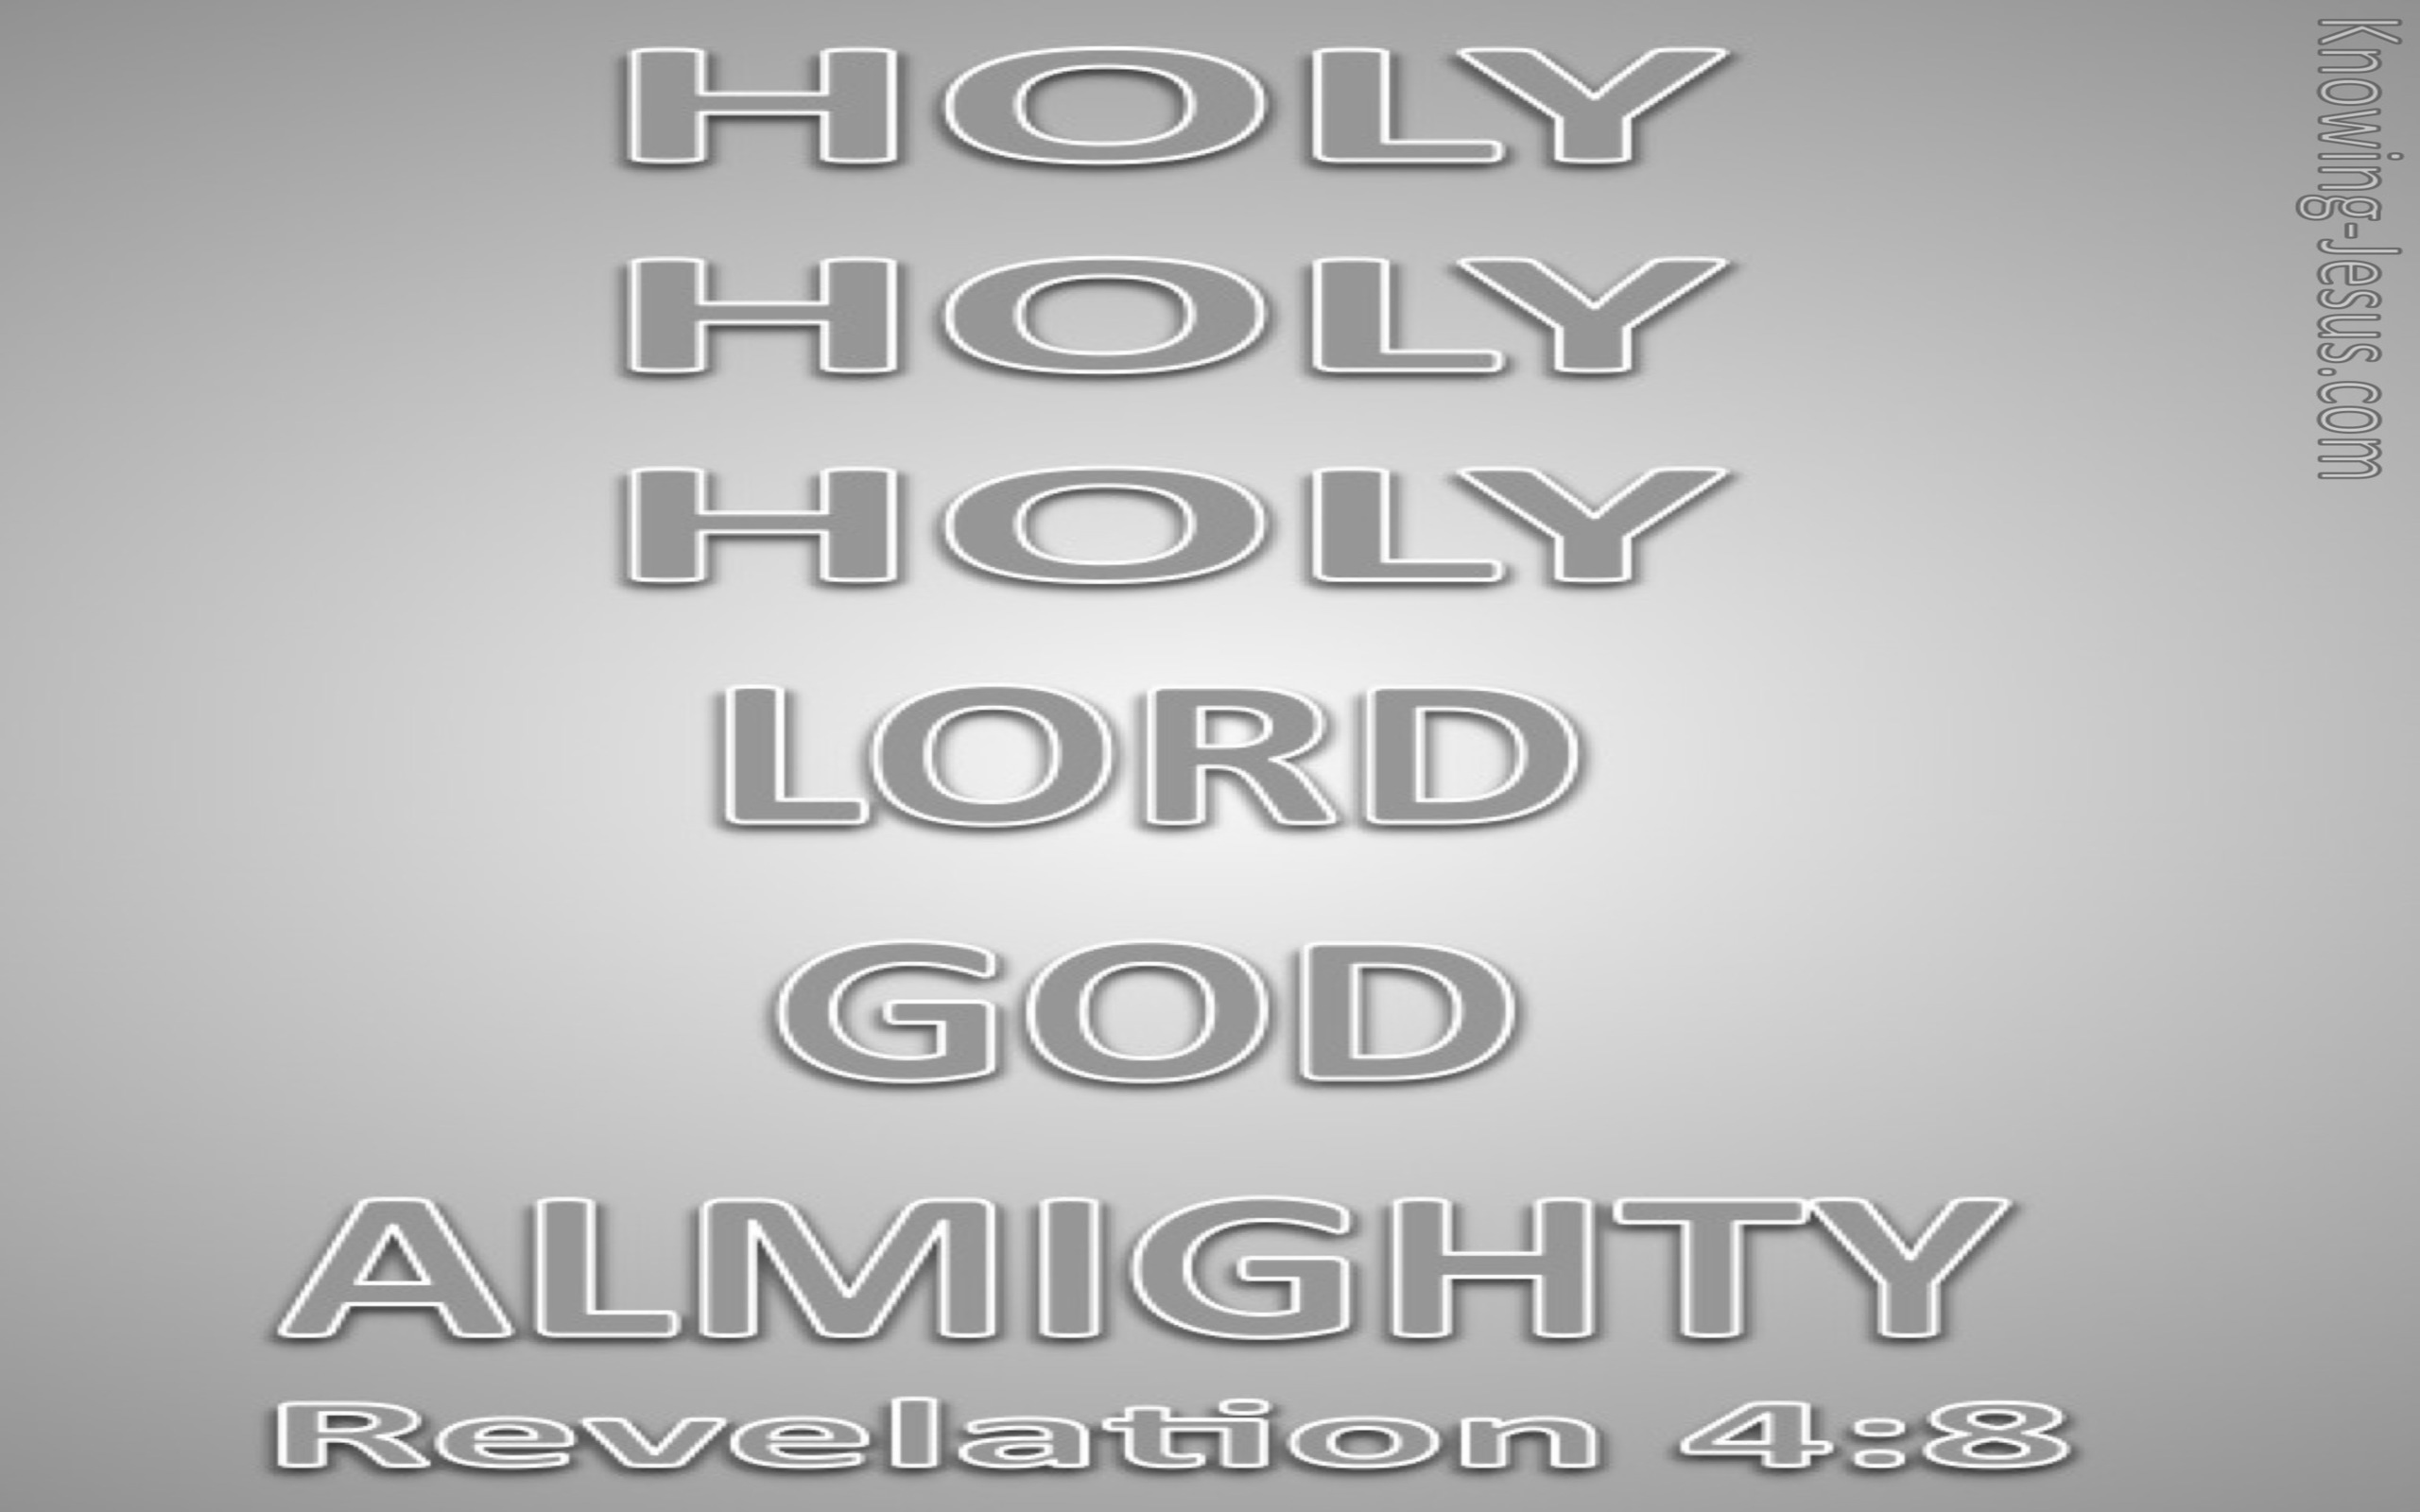 Revelation 4:8 Holy, Holy, Holy Lord God Almighty (gray)